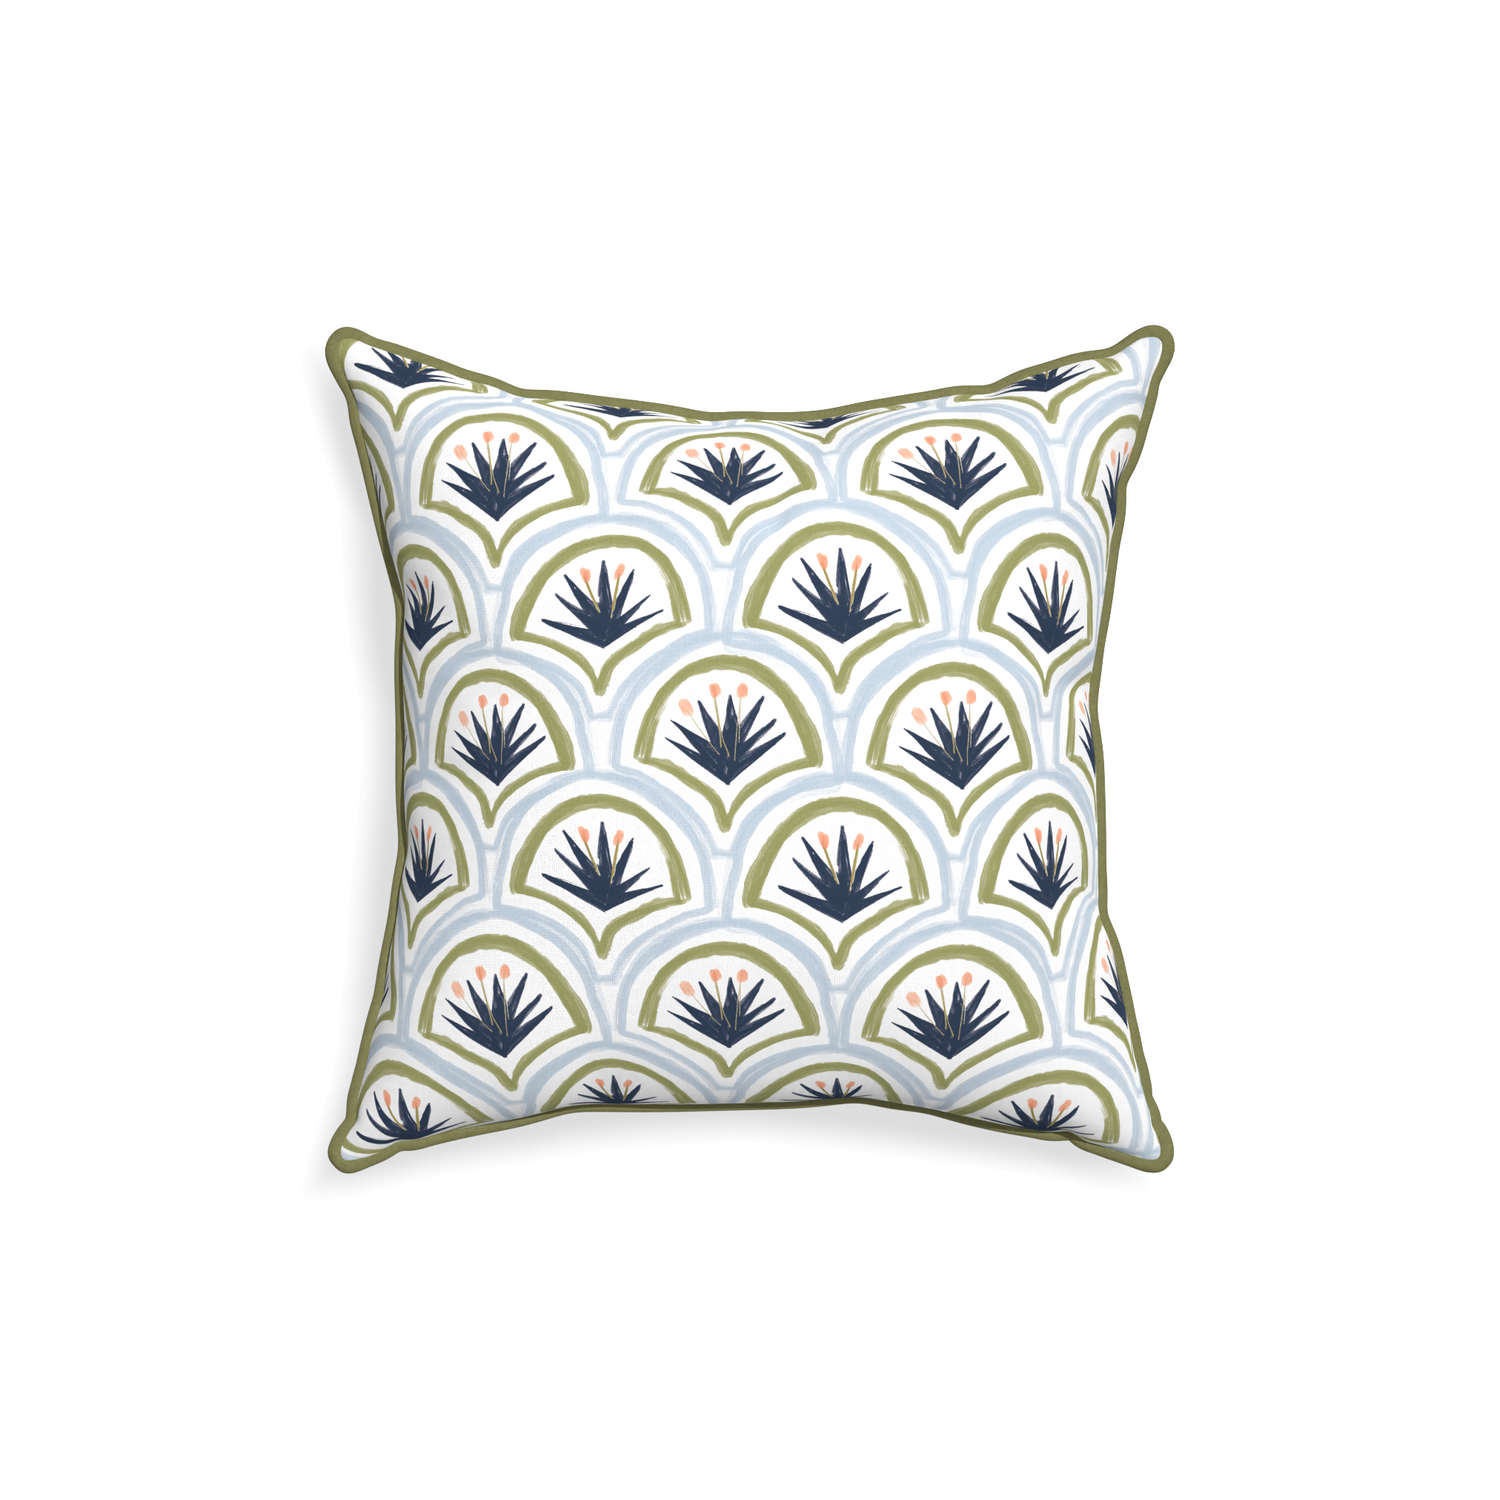 18-square thatcher midnight custom art deco palm patternpillow with moss piping on white background